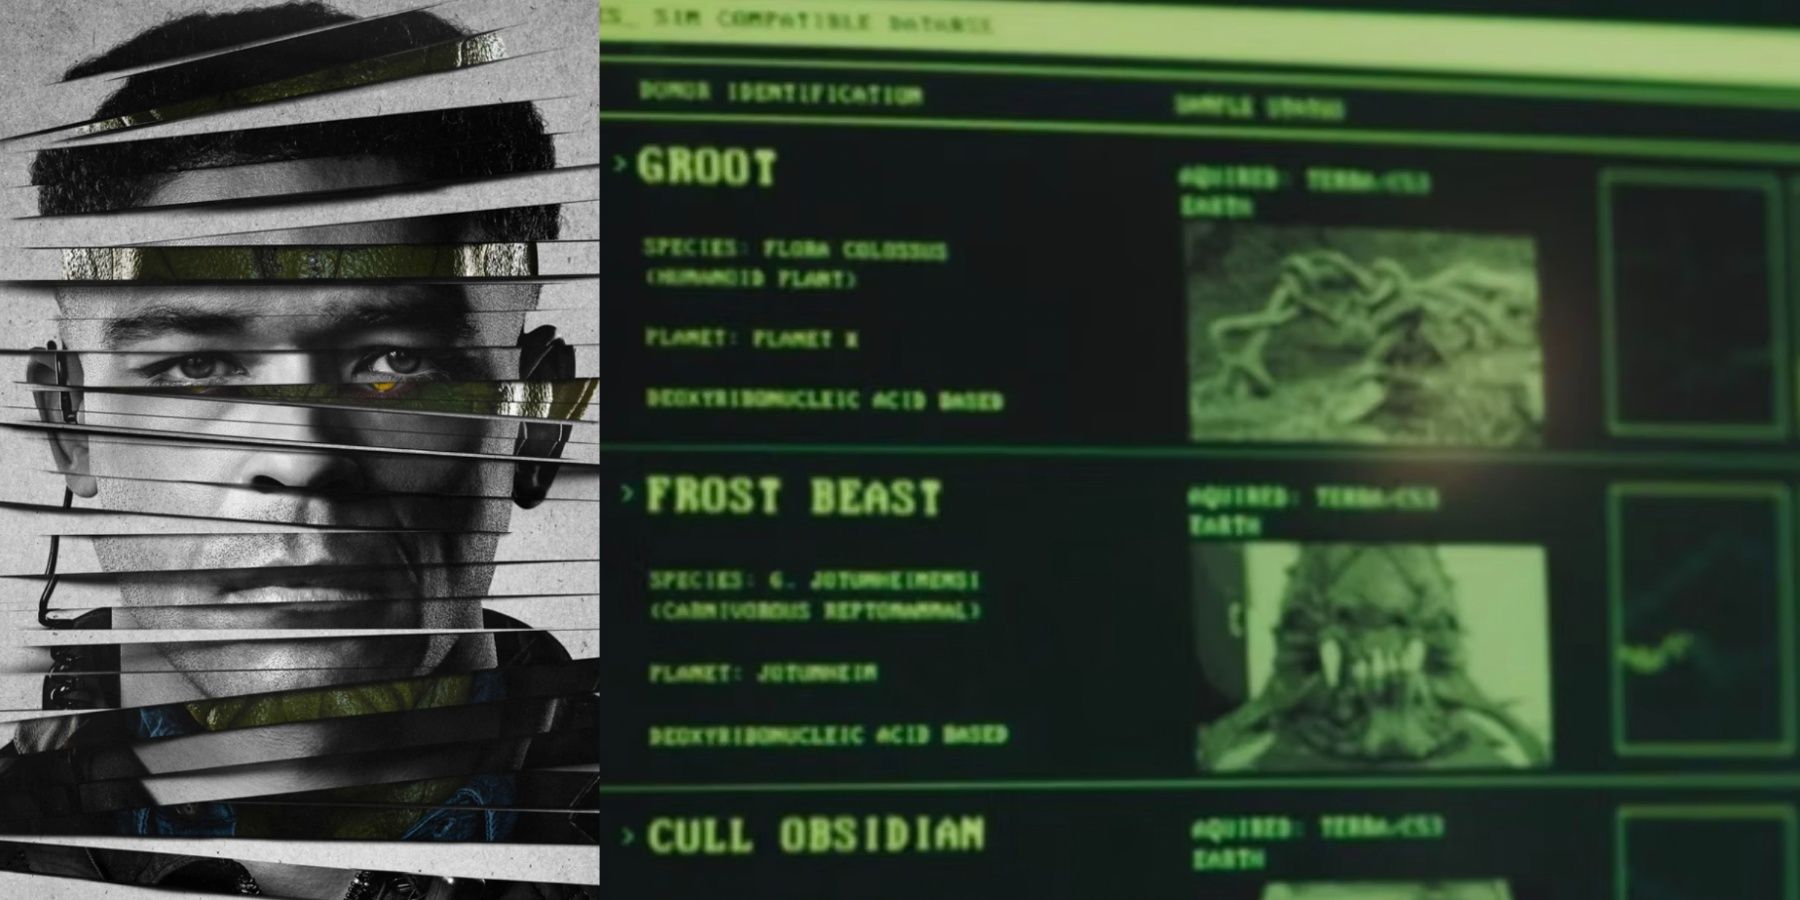 A split image features the Secret Invasion poster for Gravik and a computer screen with DNA samples from Secret Invasion episode 2